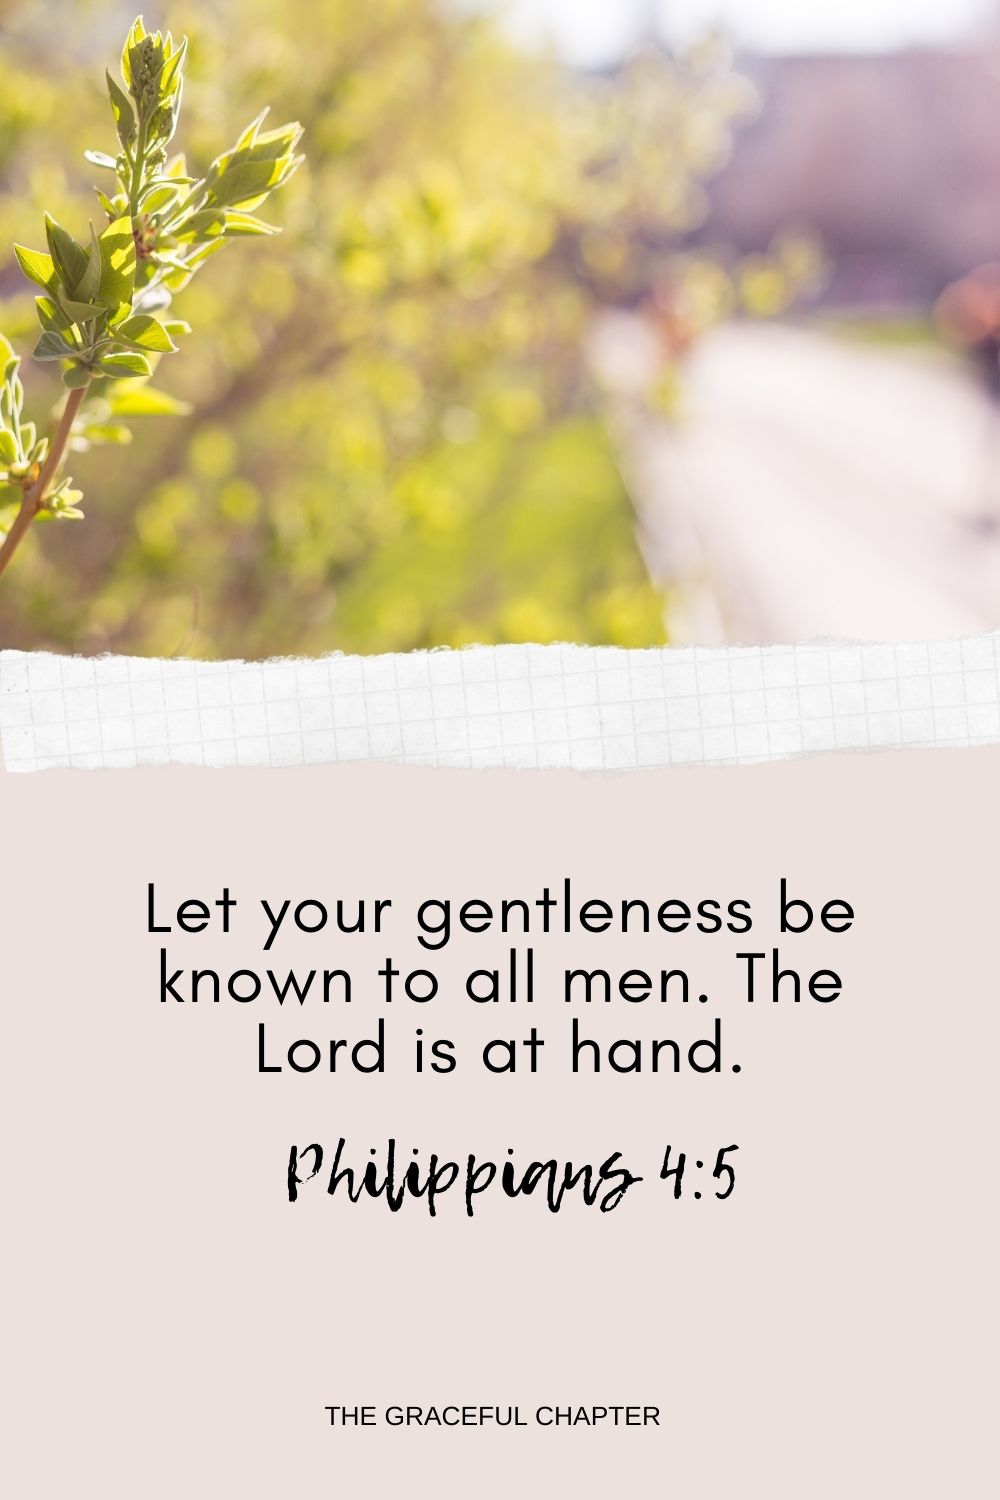 Let your gentleness be known to all men. The Lord is at hand. Philippians 4:5